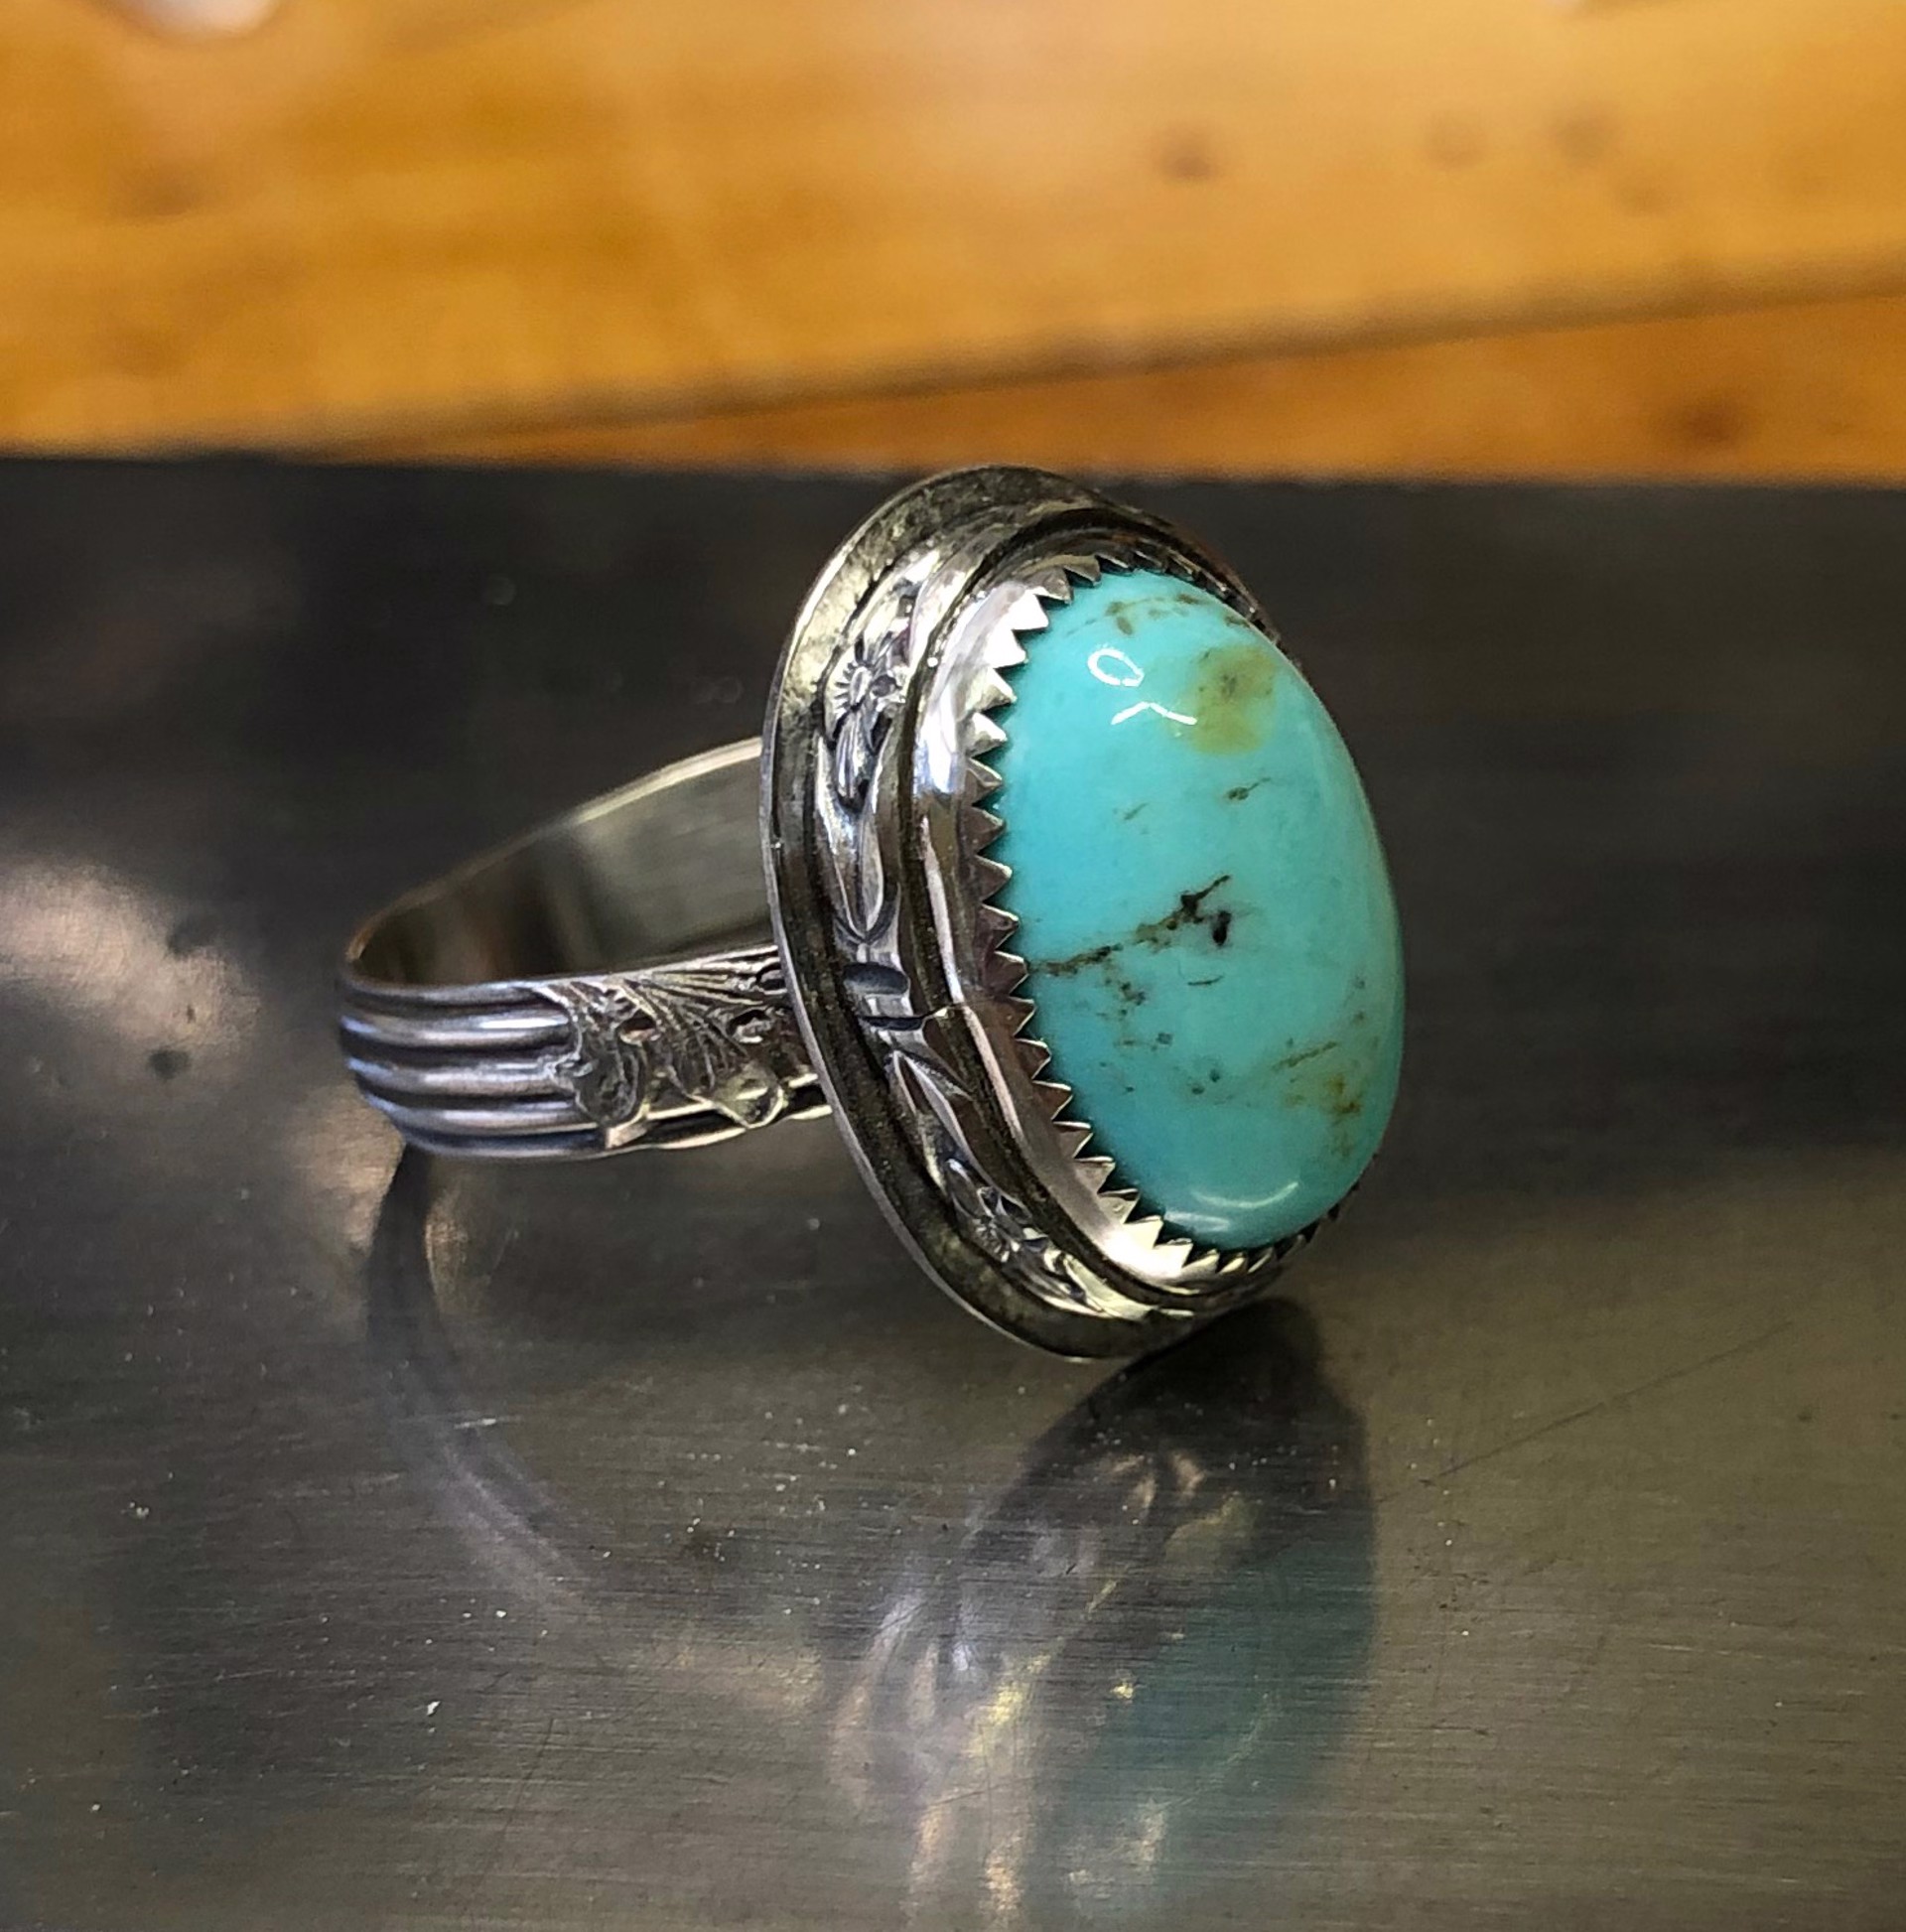 Turquoise w/Pattern Wire Bezel, Sterling Silver Ring by Amelia Whelan